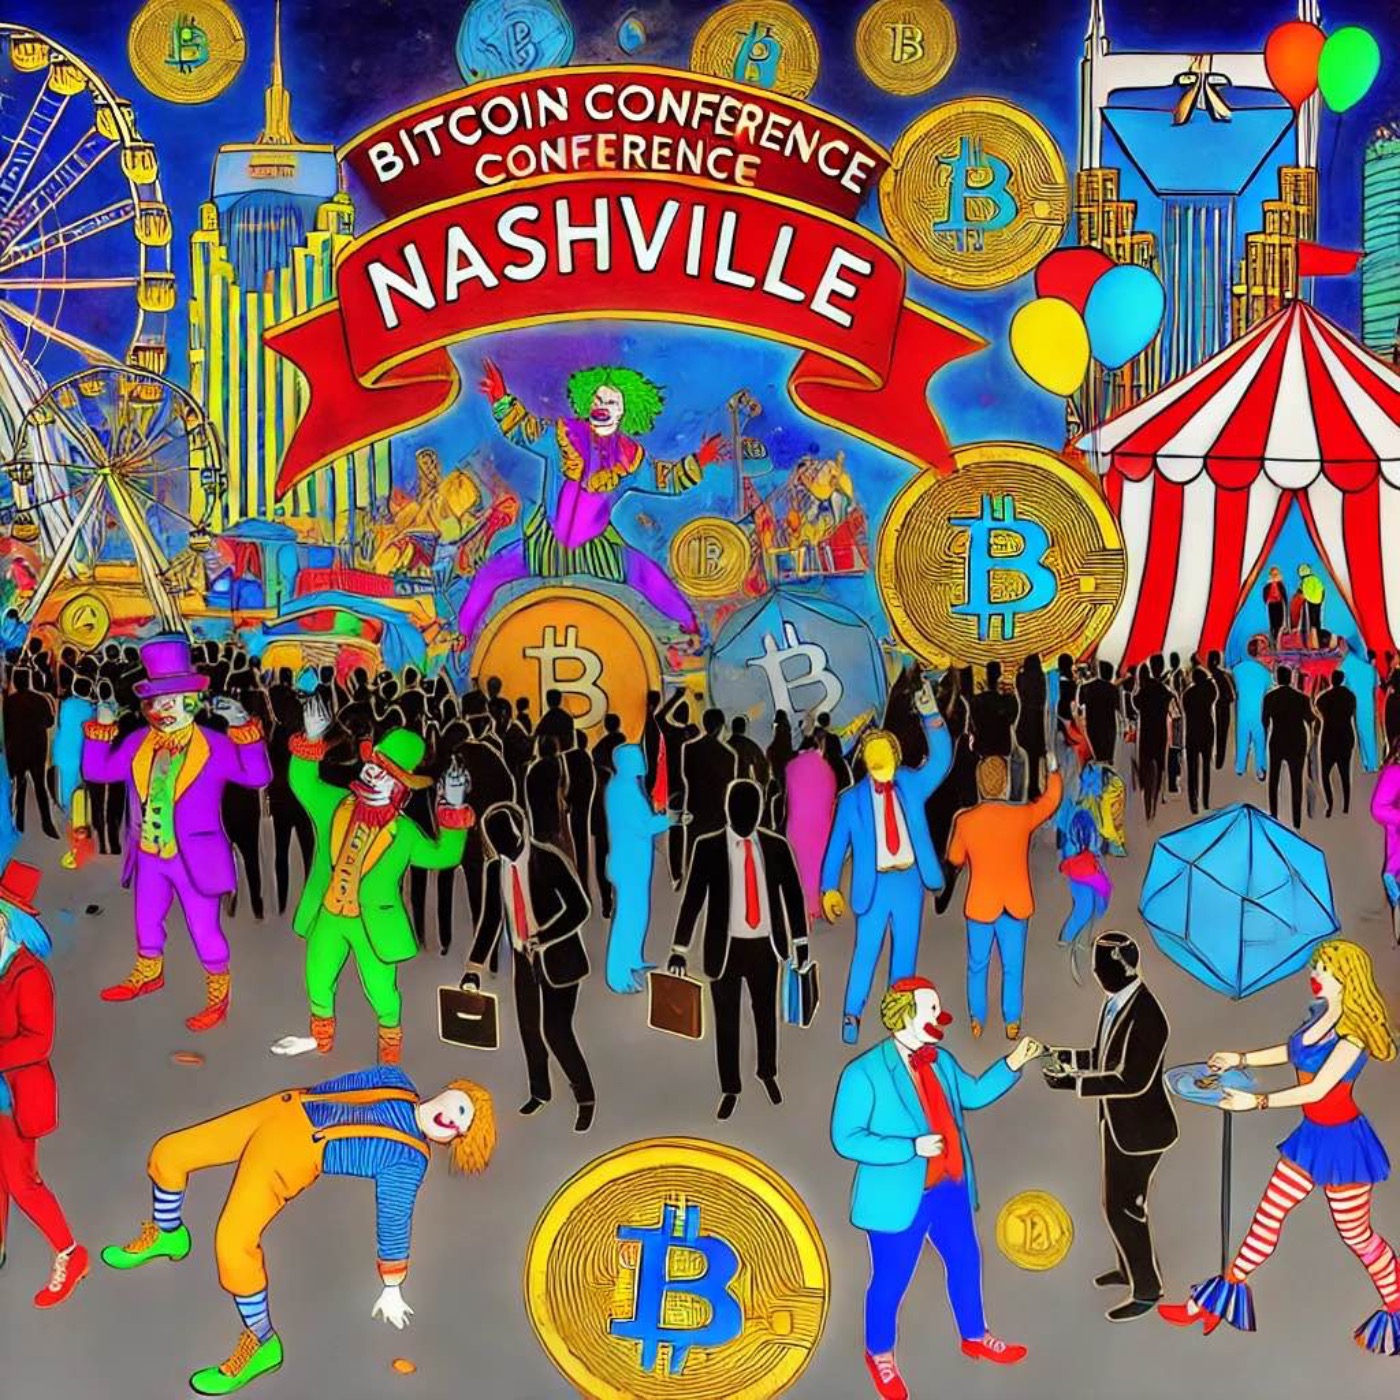 July 26: The Bitcoin Conference Circus?